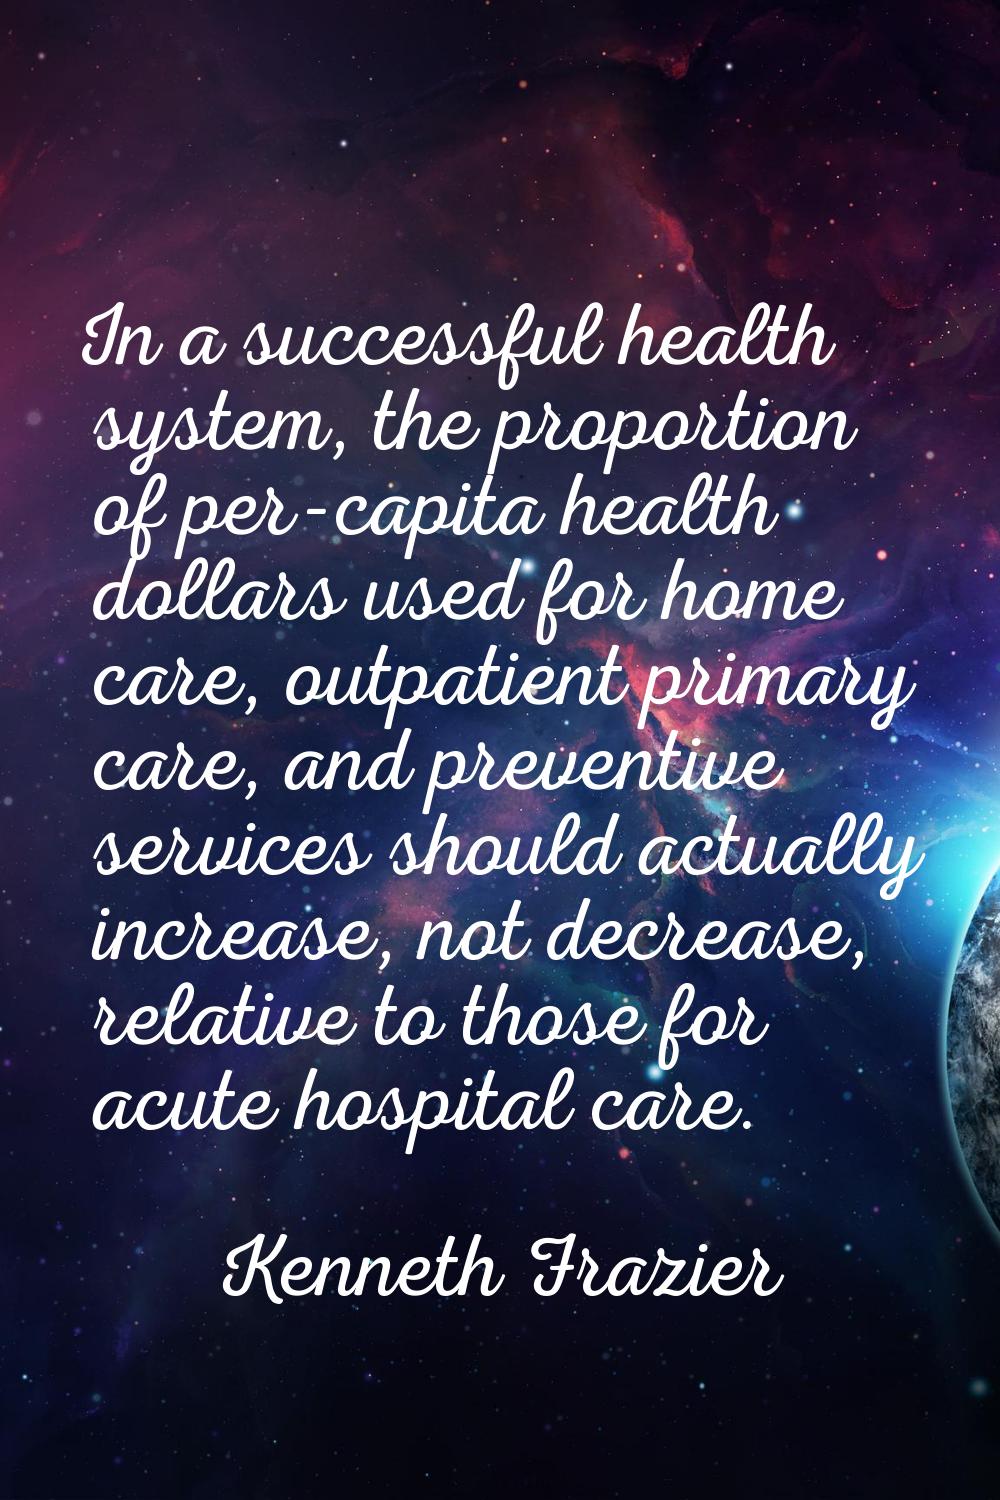 In a successful health system, the proportion of per-capita health dollars used for home care, outp